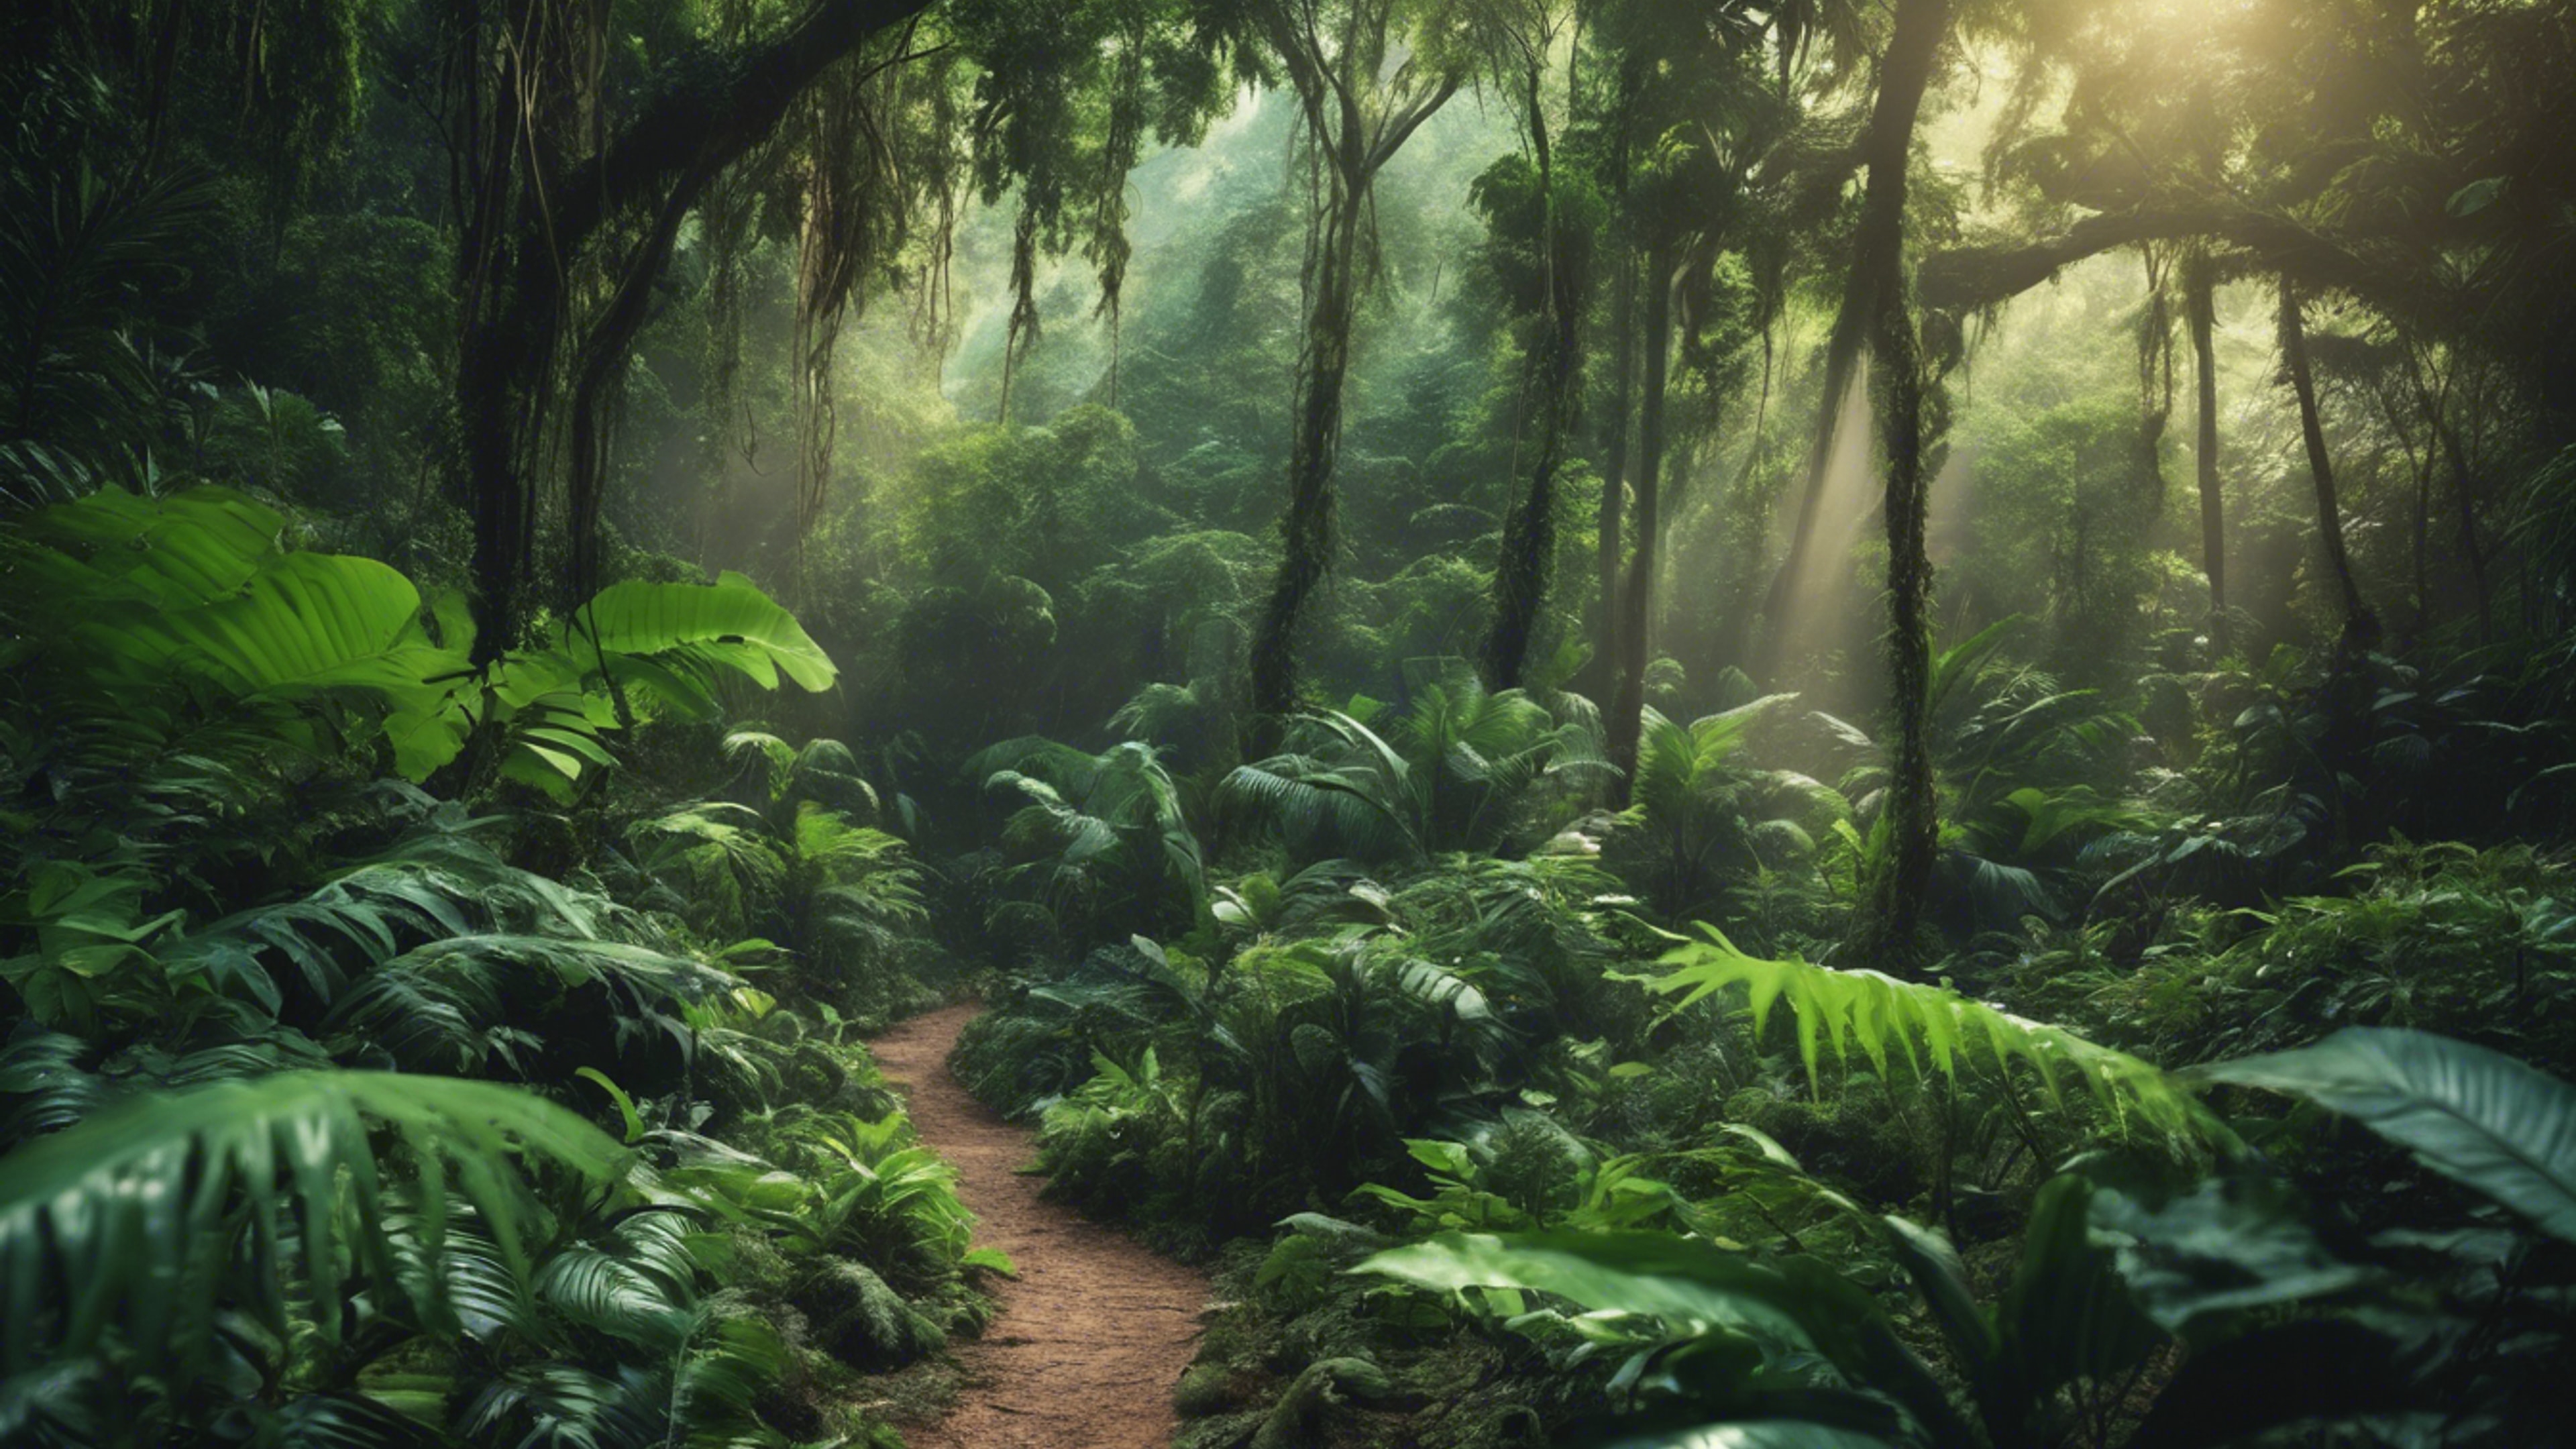 A lush tropical rainforest scene depicting the mysterious aura of nature. Wallpaper[ca584bb6292f4659923d]